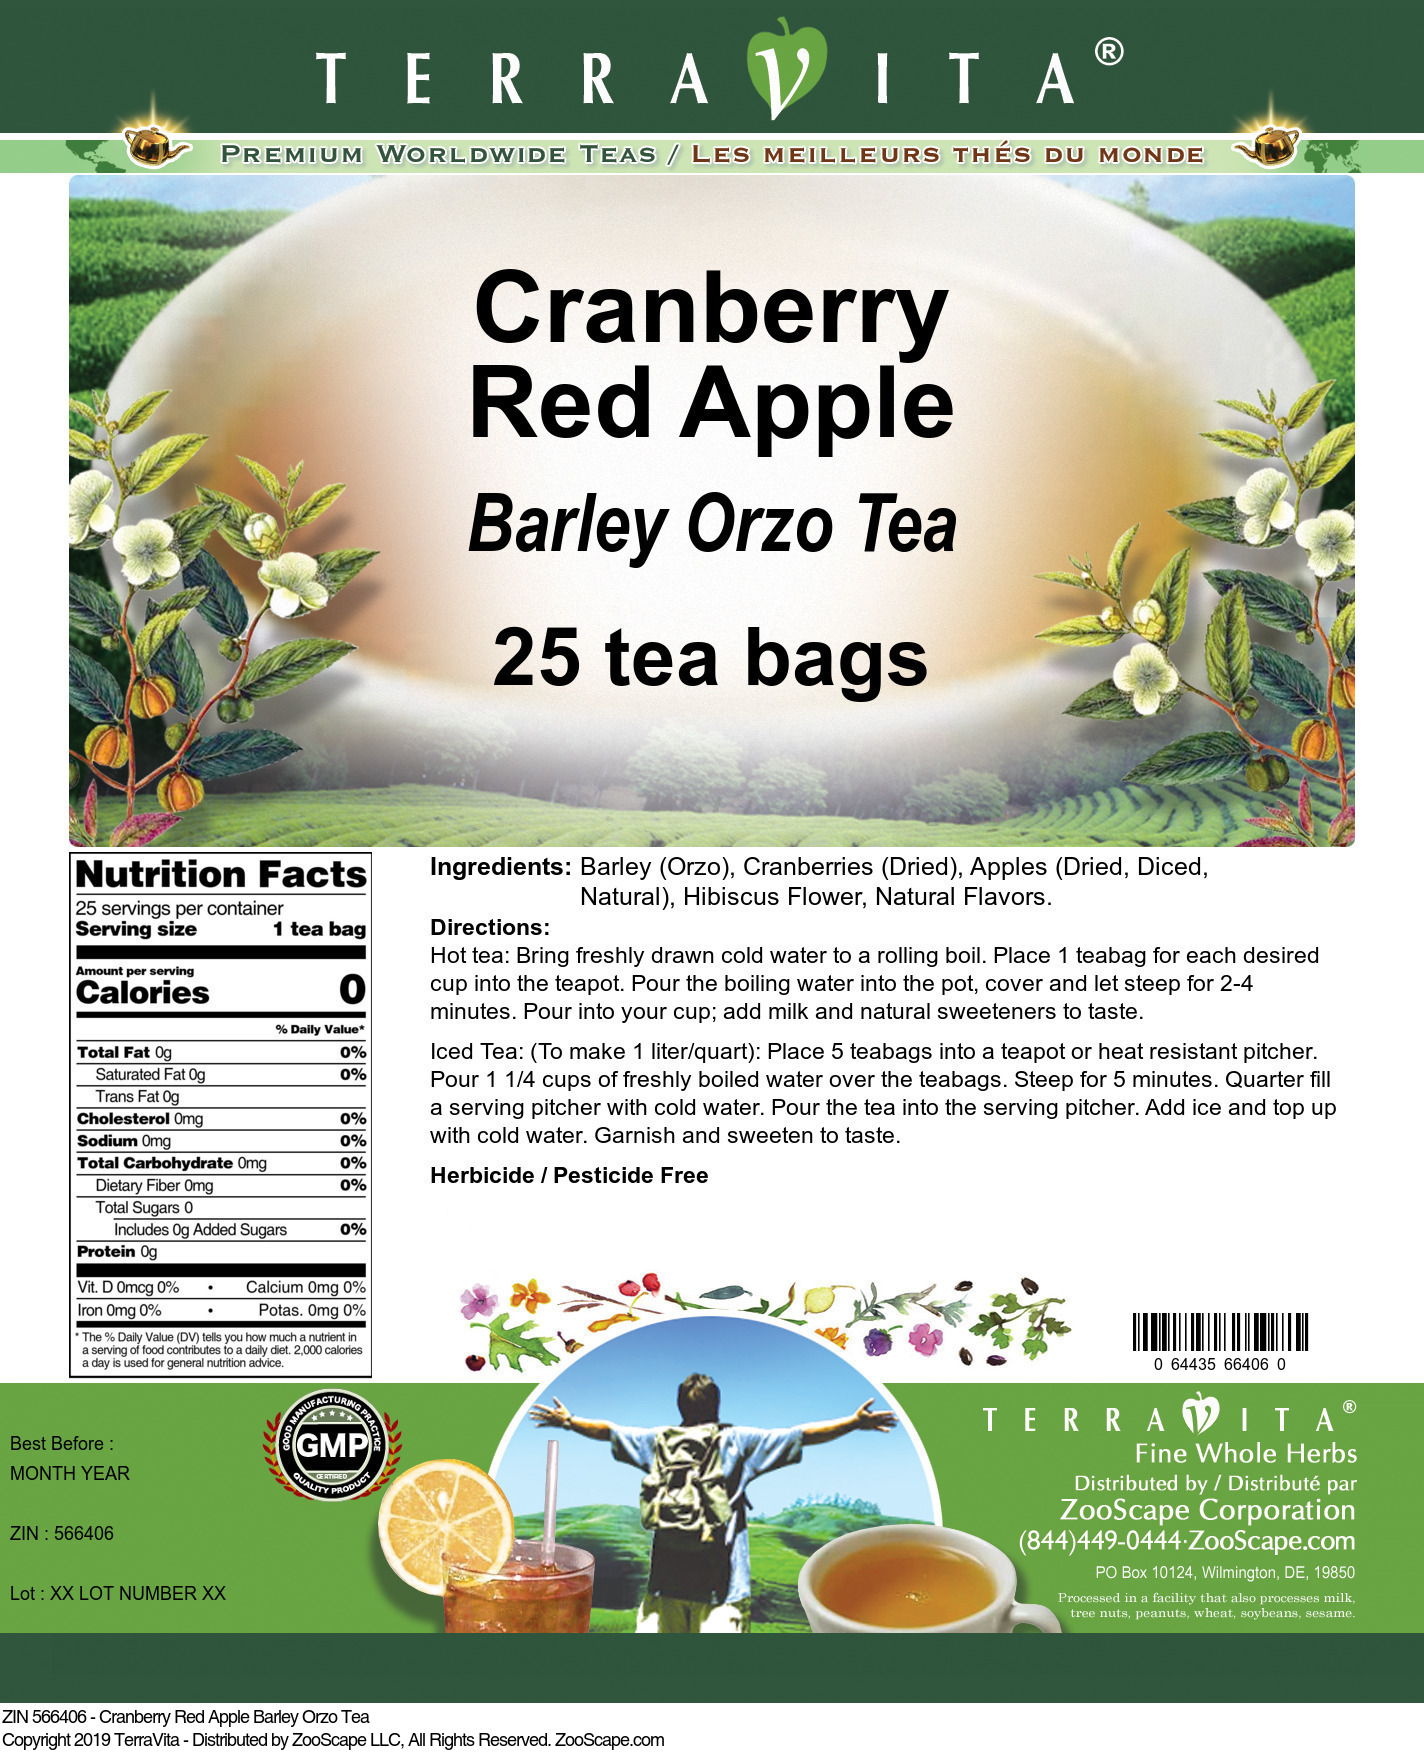 Cranberry Red Apple Barley Orzo Tea - Label